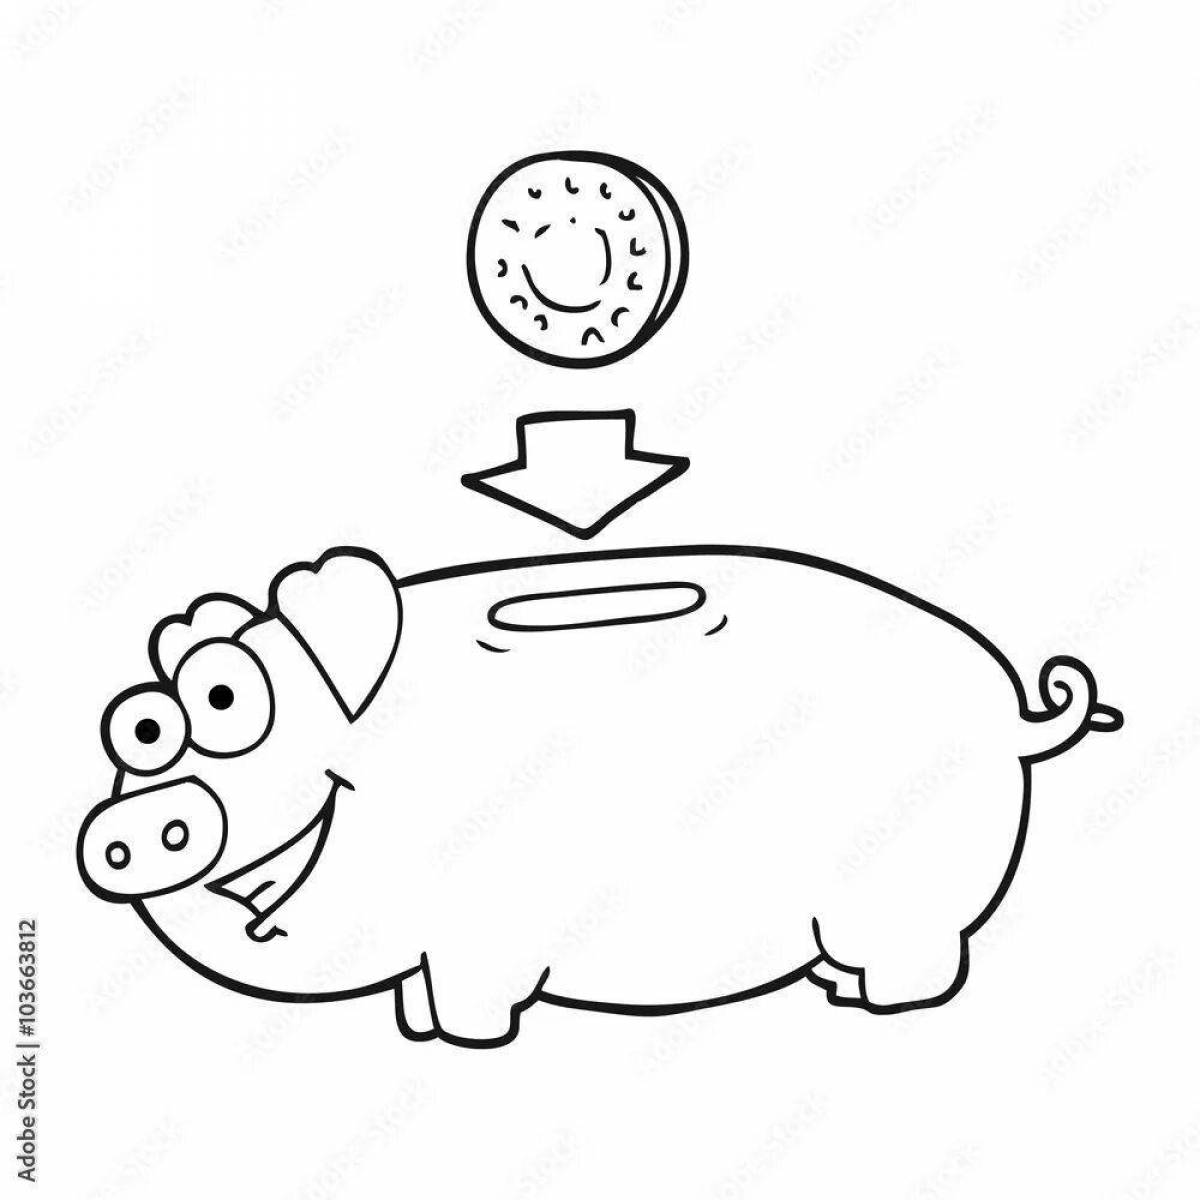 Amazing piggy bank coloring page